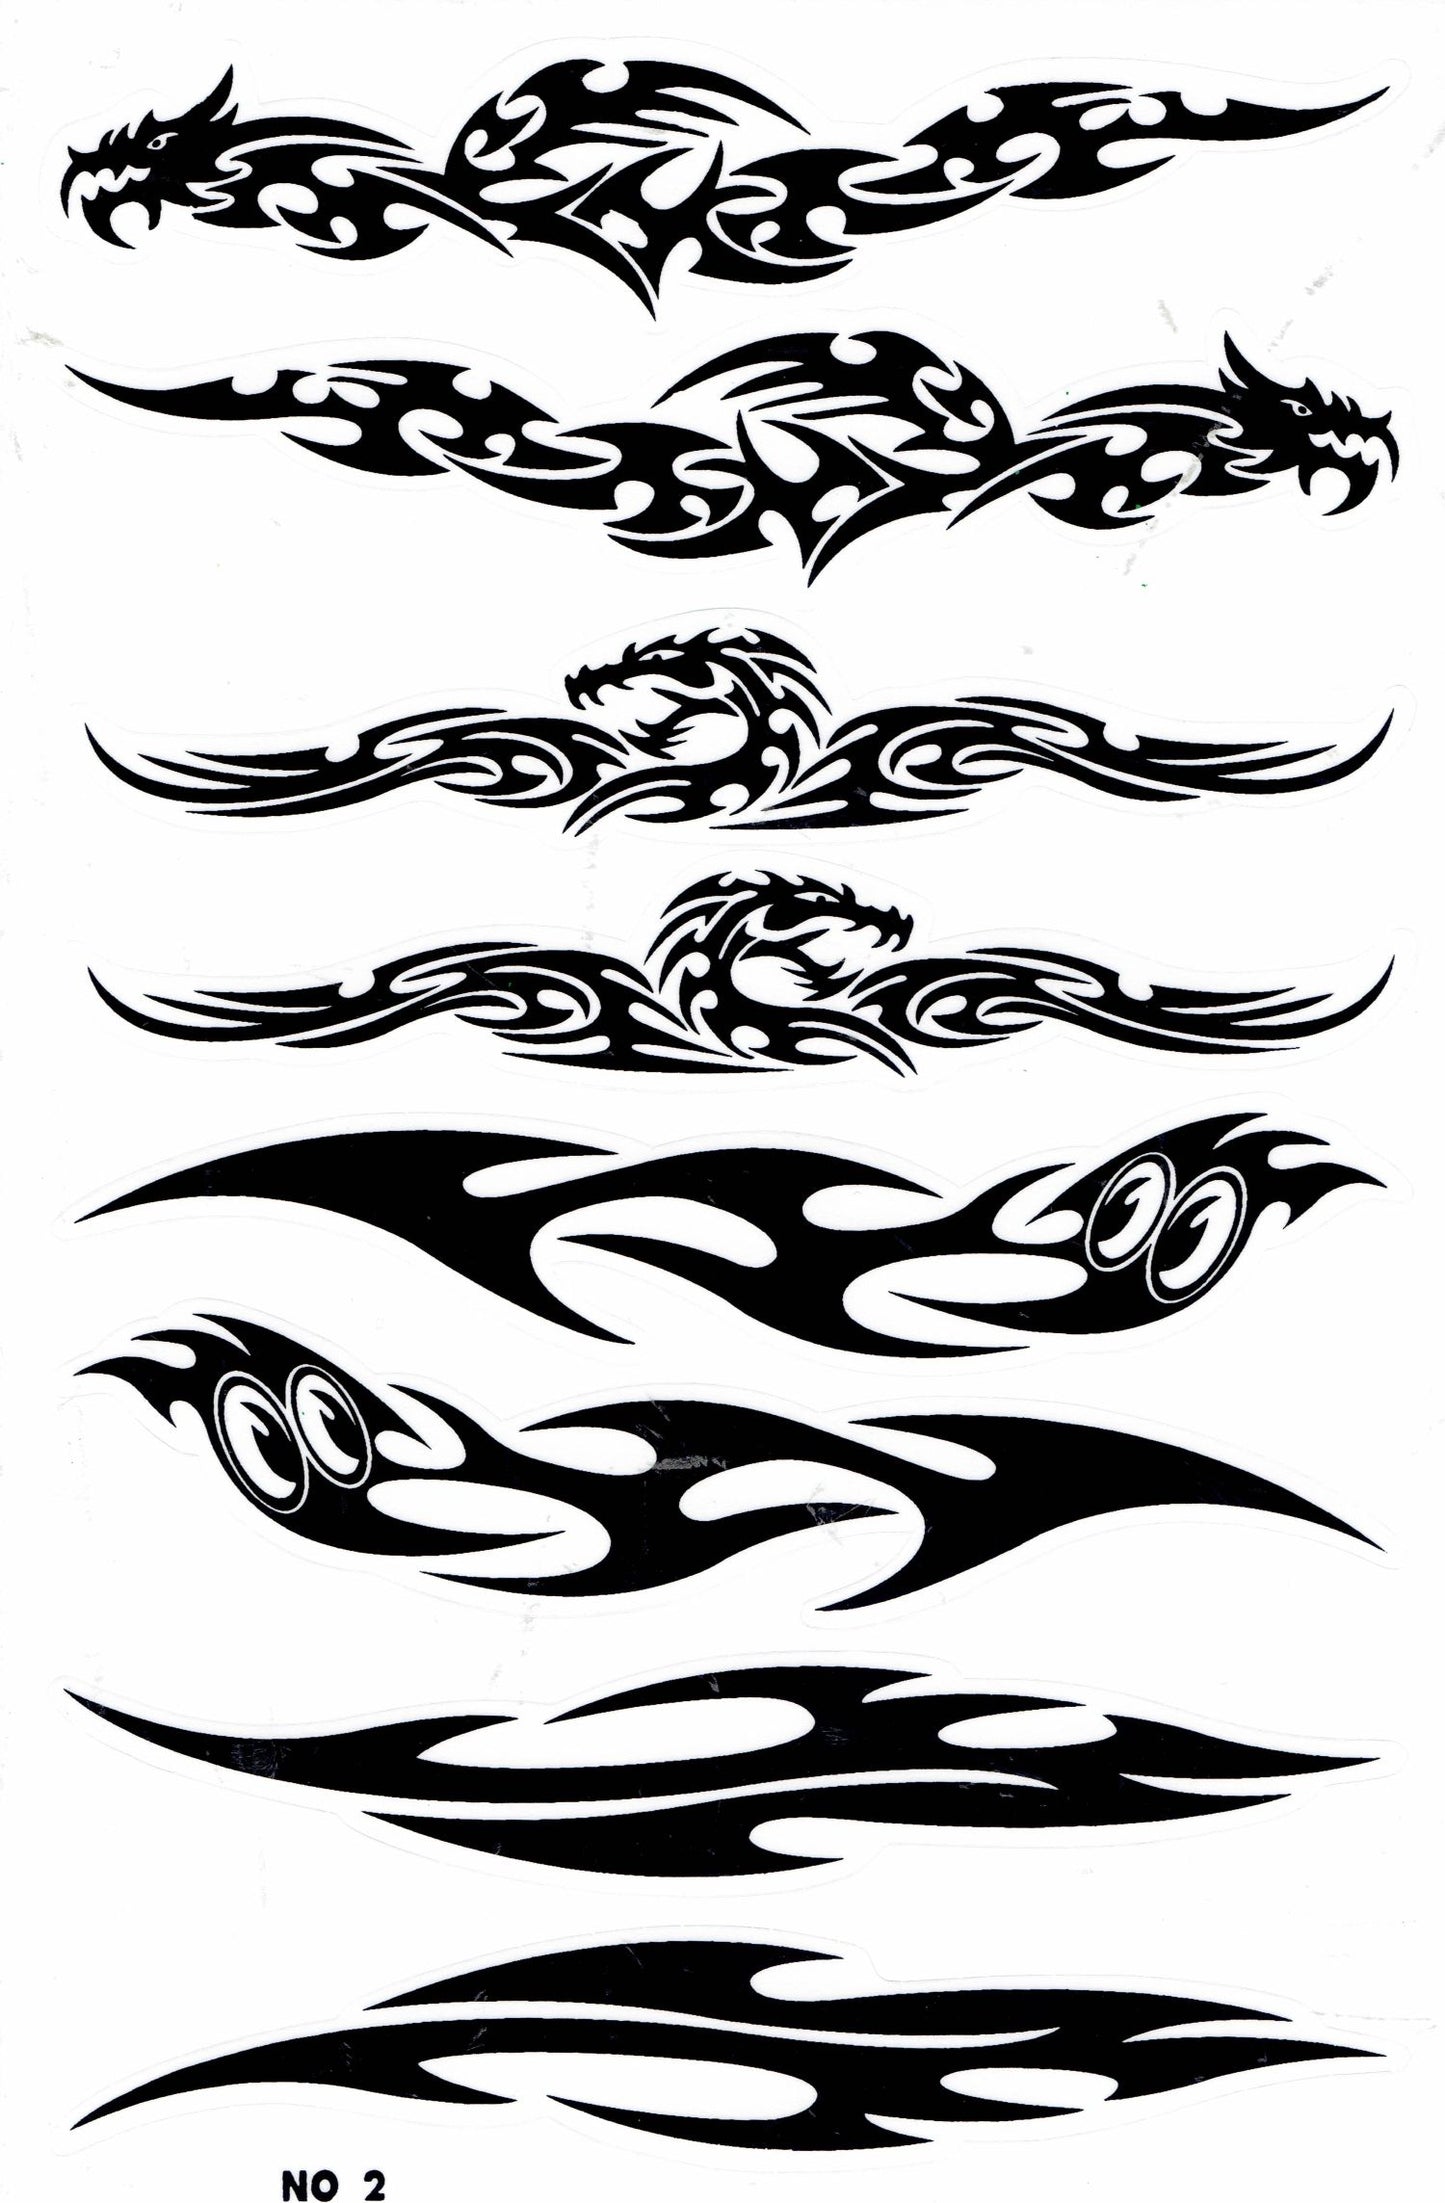 Flames fire black sticker motorcycle scooter skateboard car tuning model building self-adhesive 241